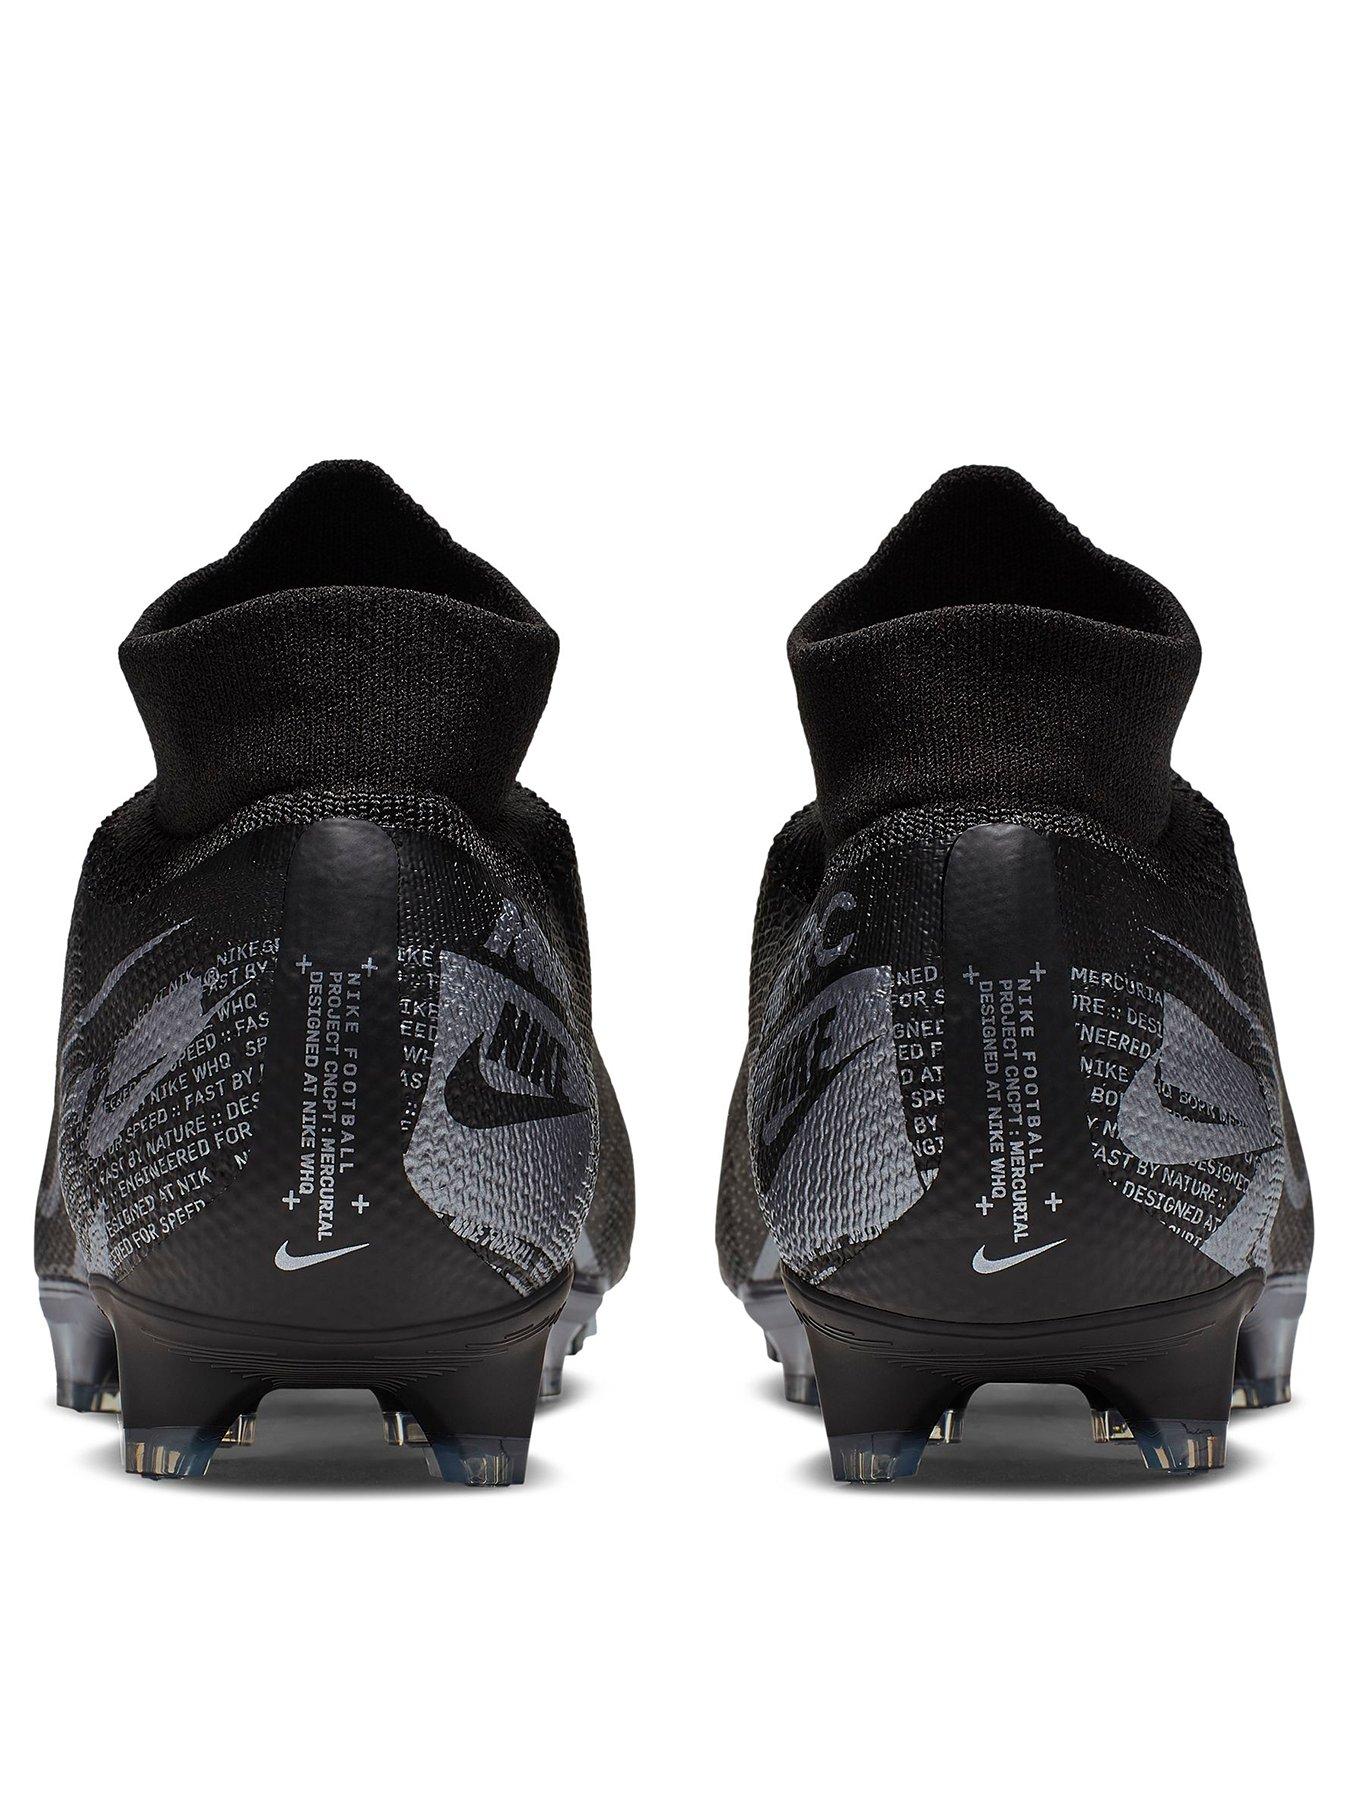 Nike Superfly 6 Pro LVL UP FG Football boots for terrain.